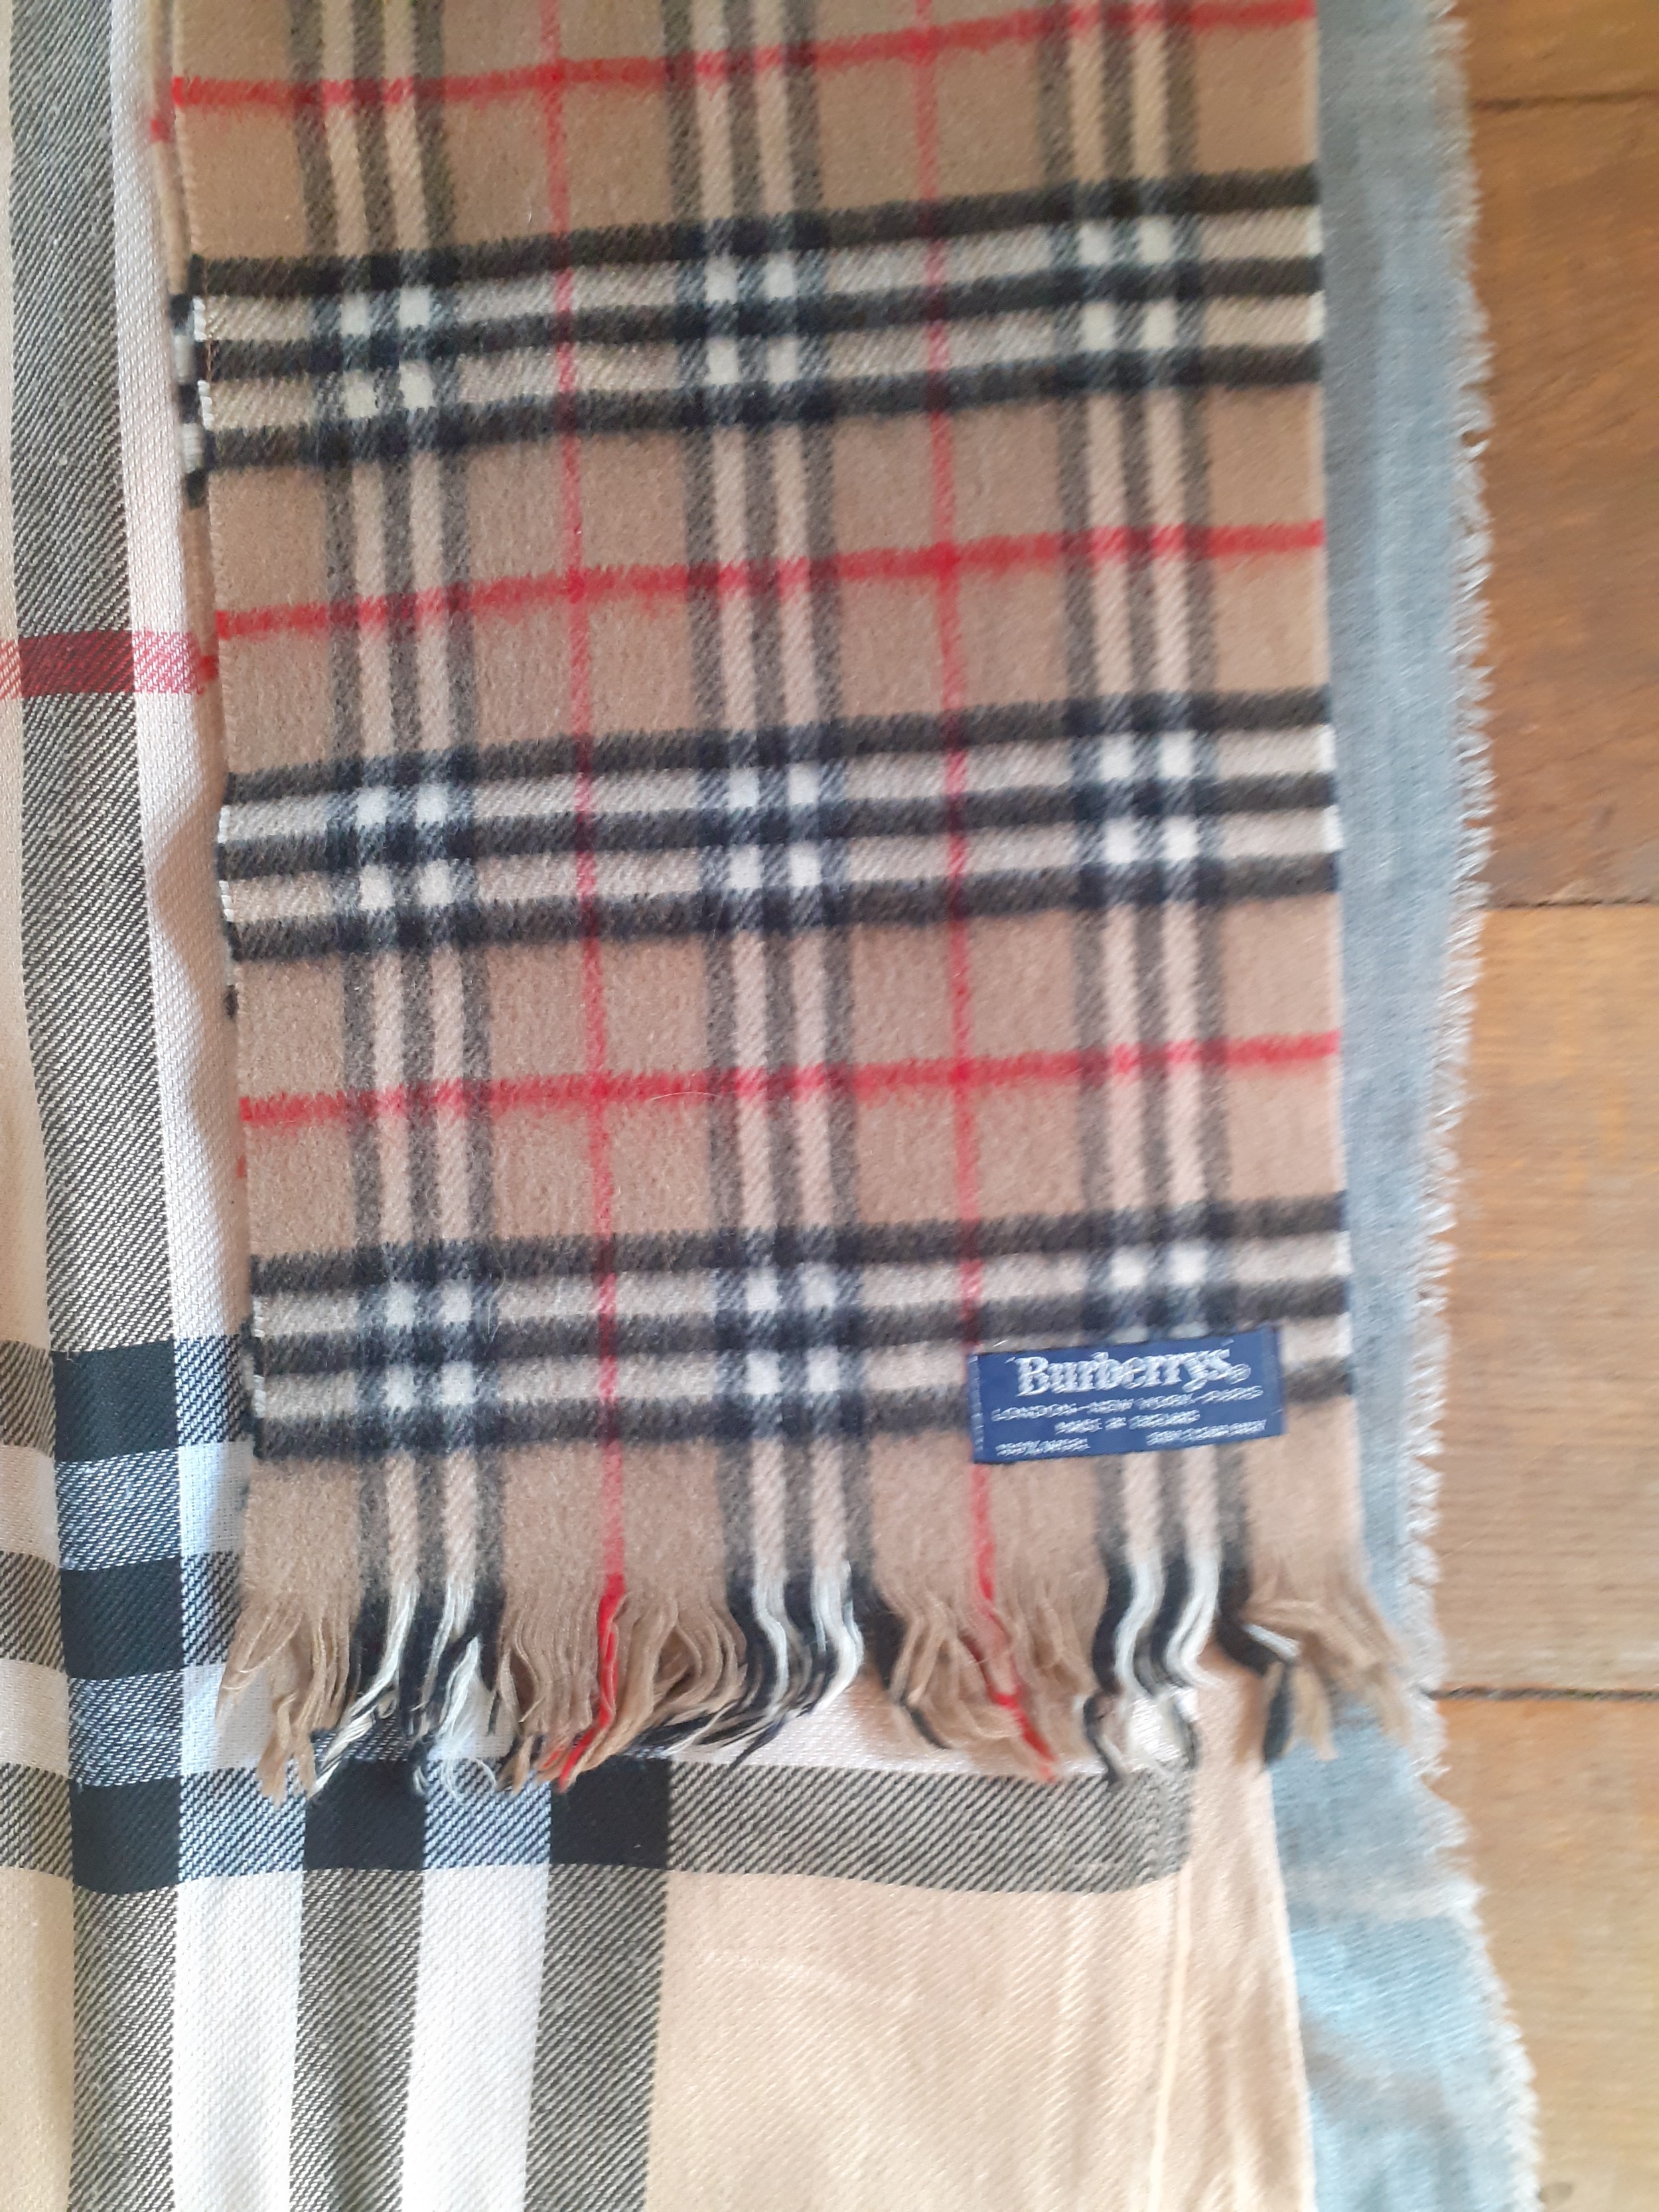 Four wraps and 1 scarf in a tartan design, 2 in the style of a British fashion designer Location:RAF - Image 3 of 4